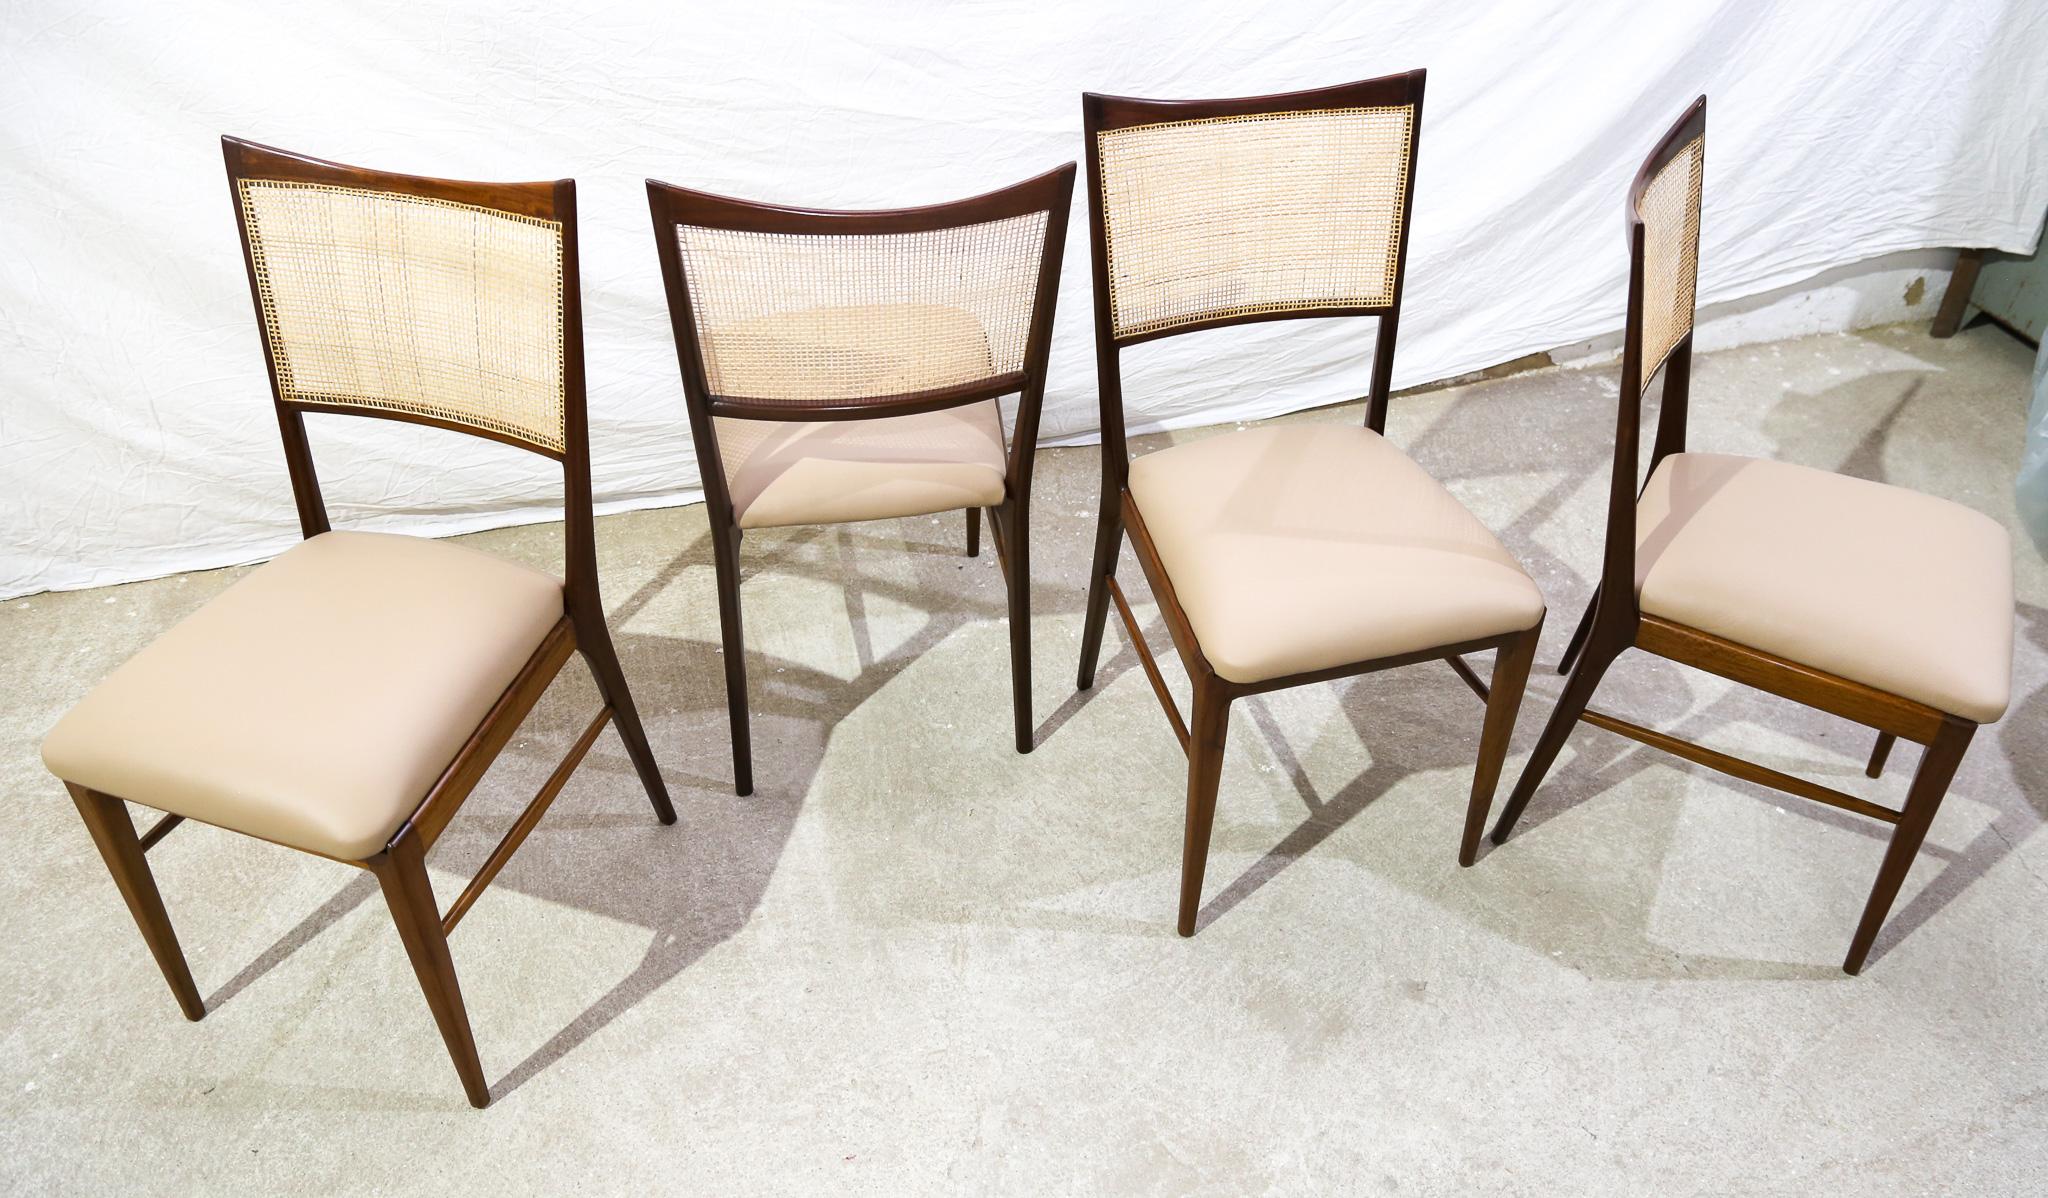 Brazilian Modern Set of Four Chairs in Hardwood & Beige Leather, Unknown, 1960s 4